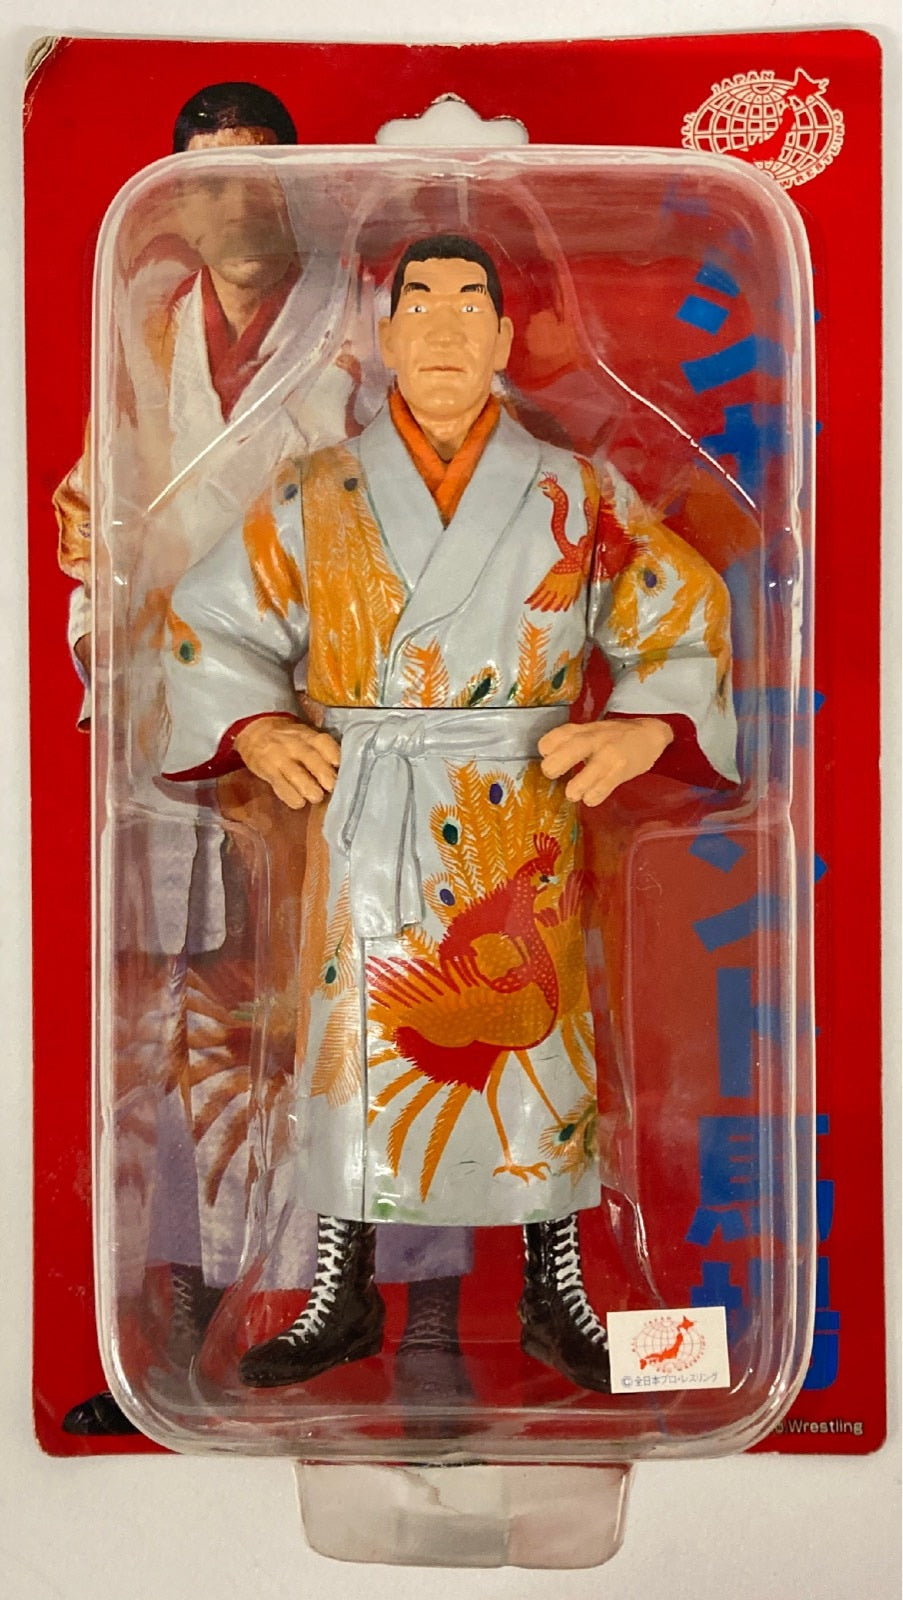 2003 AJPW CharaPro Deluxe Giant Baba [With Robe]